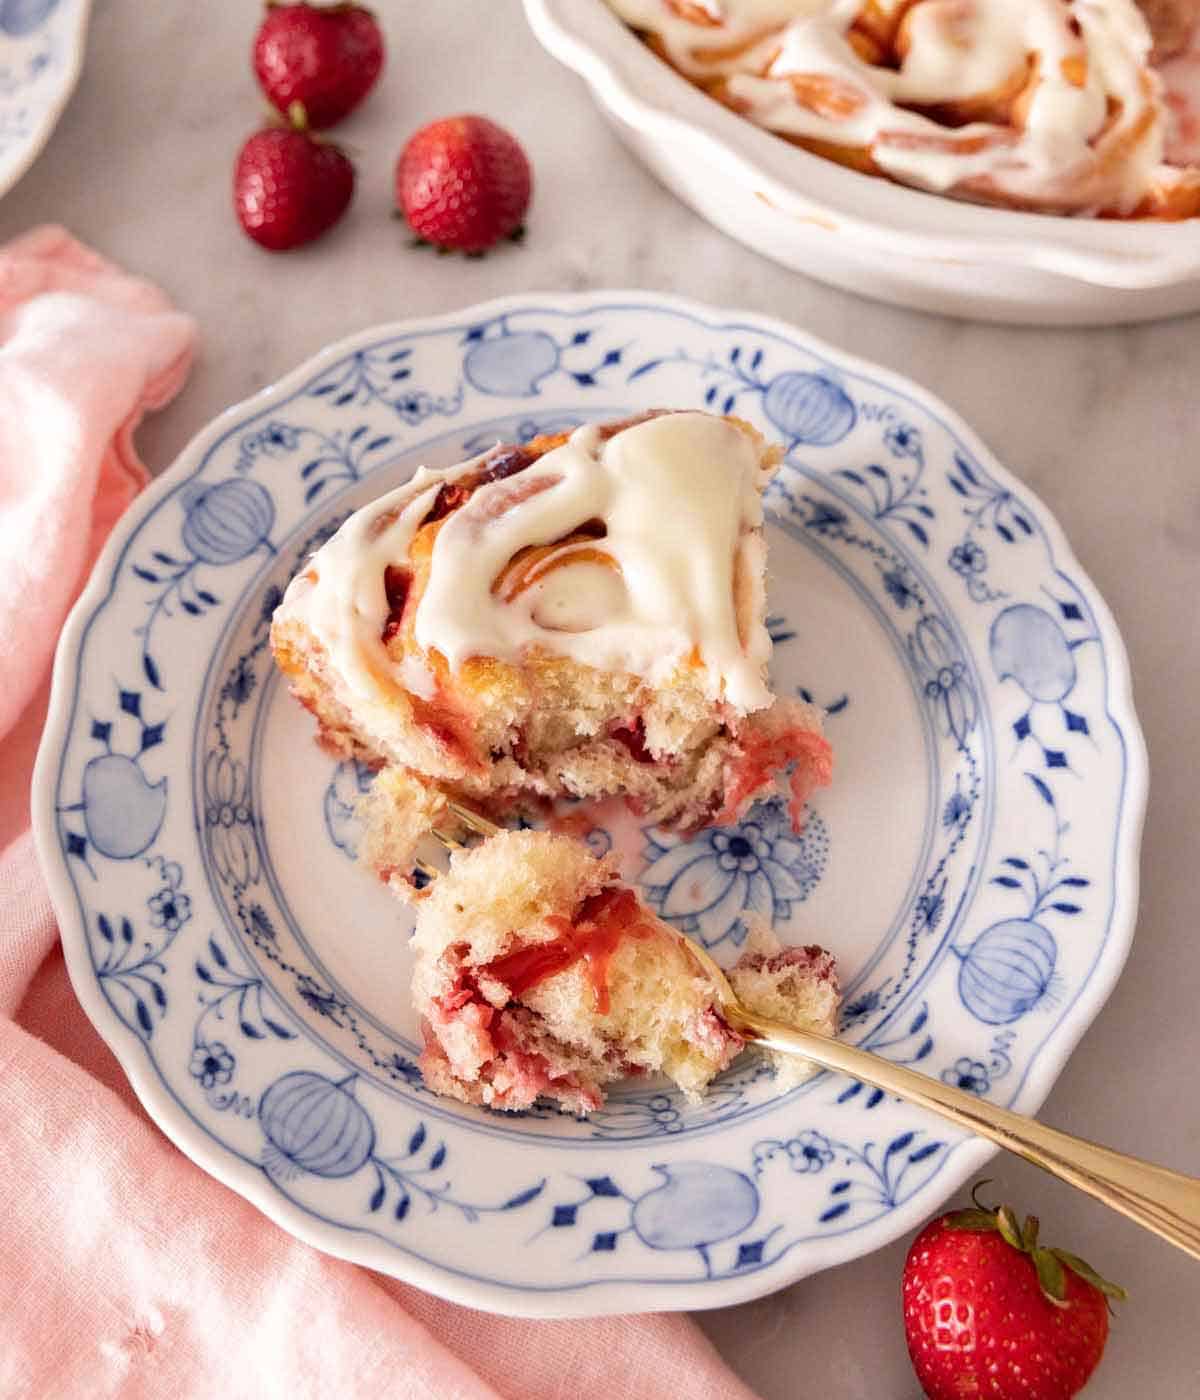 A plate with a piece of strawberry roll with a bite on a fork with fresh strawberries scattered around.